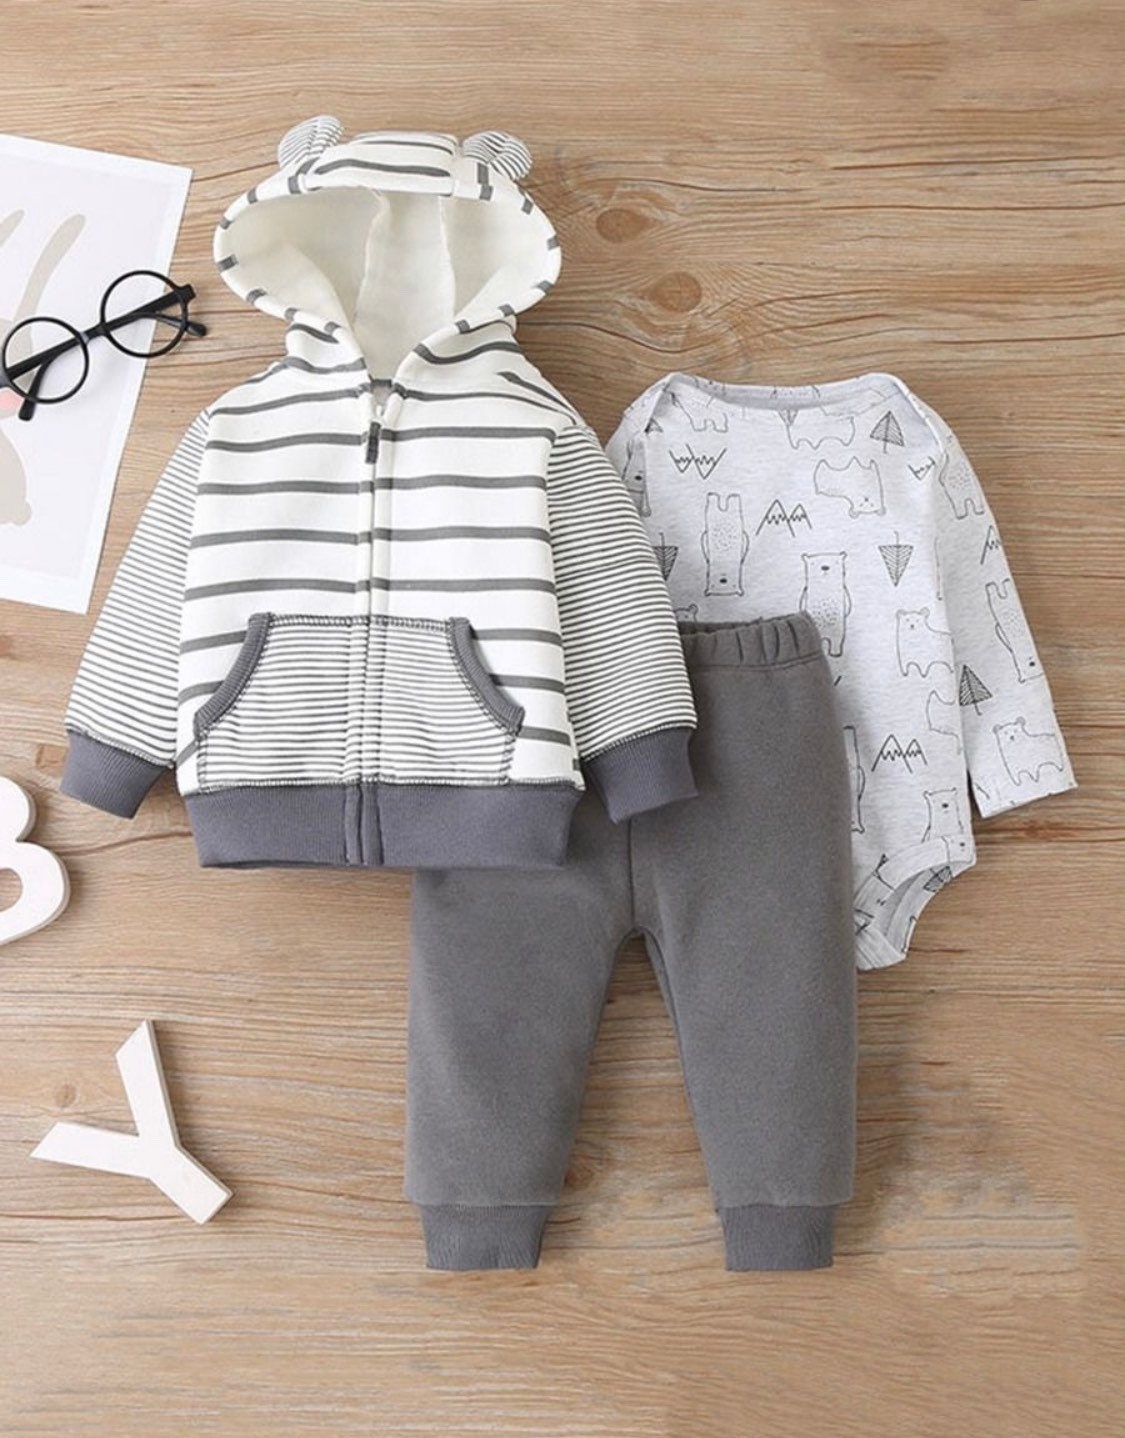 Baby Hoodie Setbaby Clothesbaby Boy Outfitnewborn Baby Pants Setinfant ...